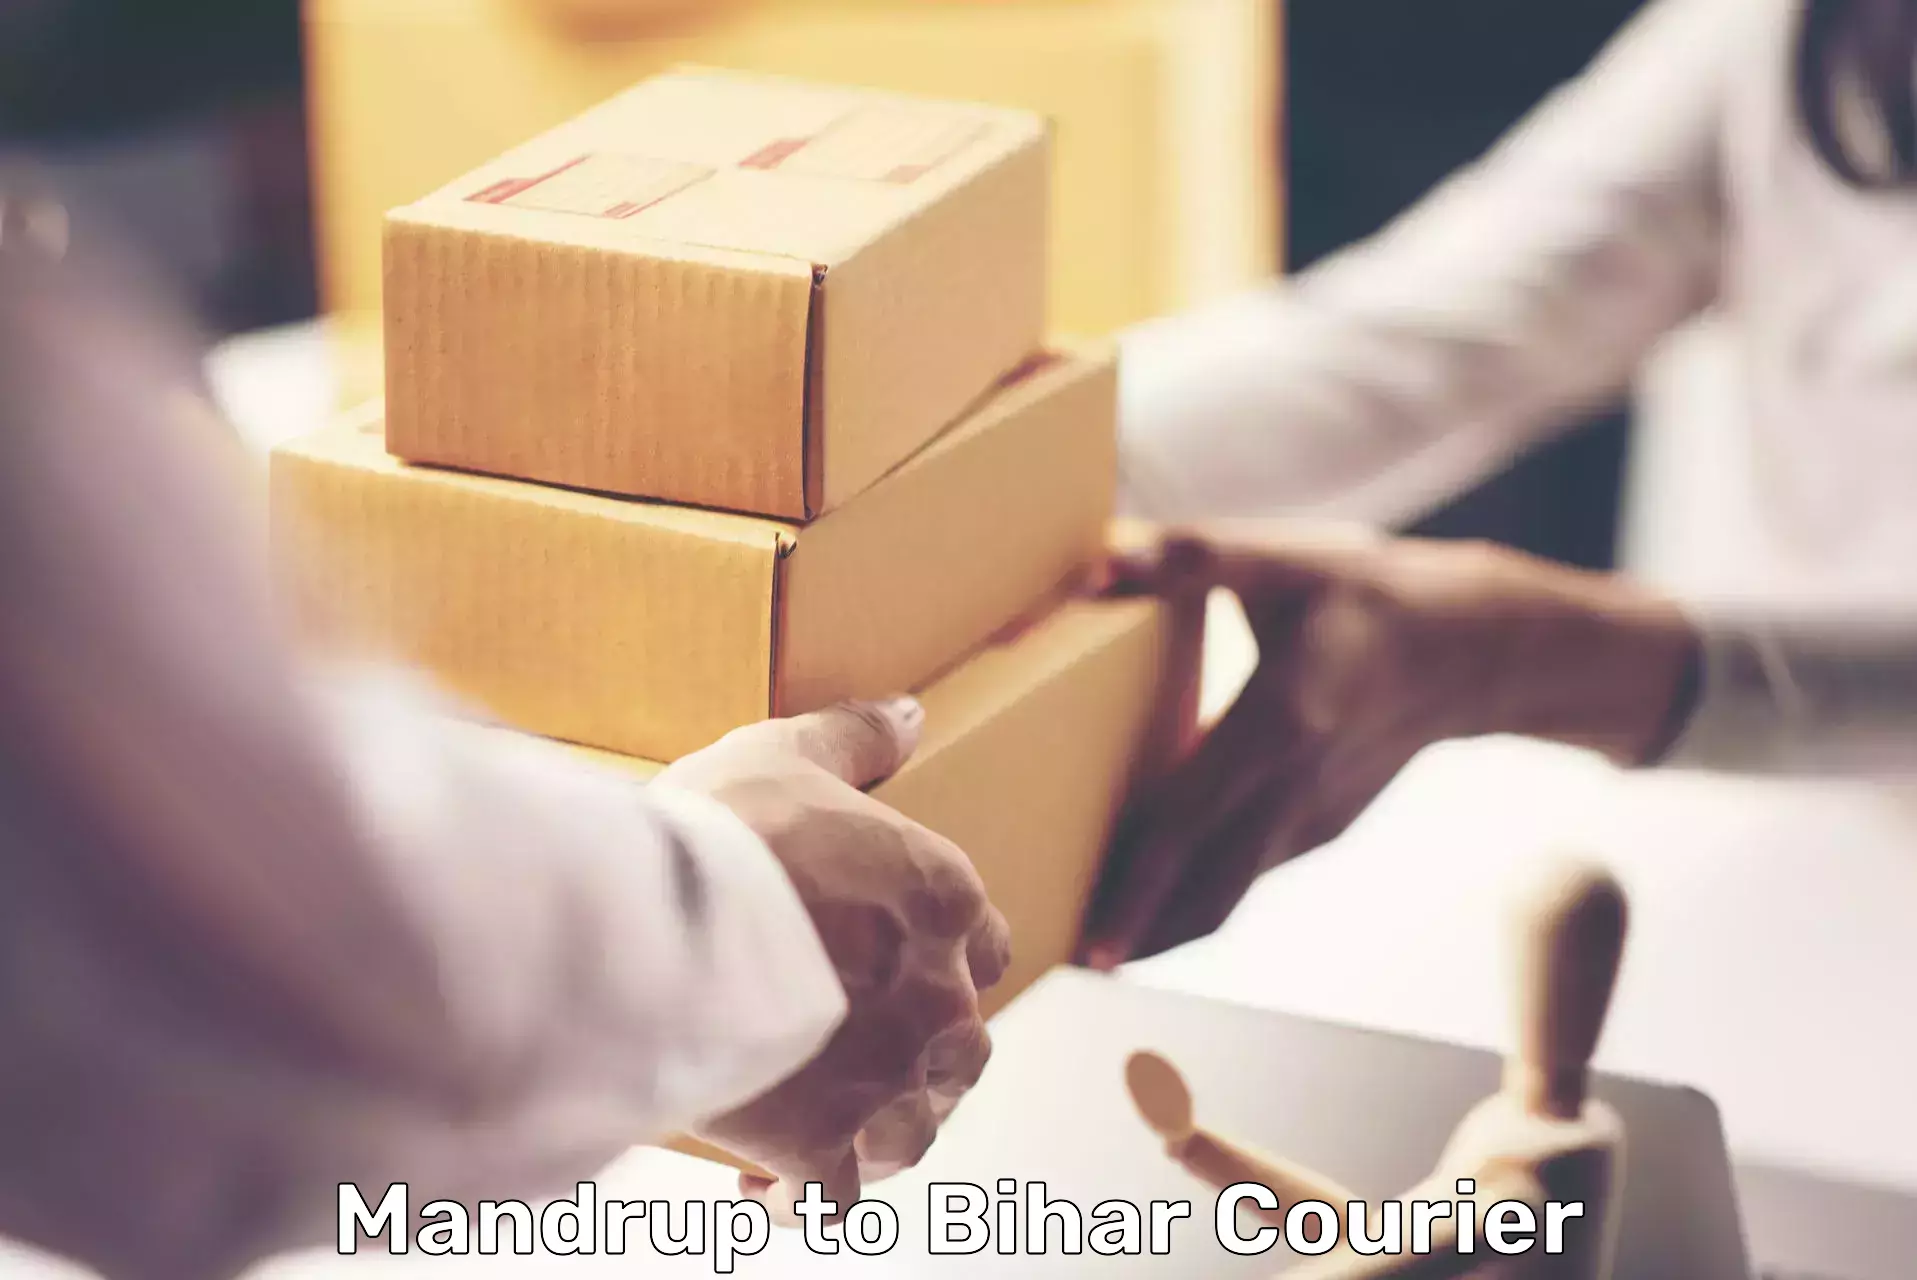 Customer-oriented courier services Mandrup to Kumarkhand